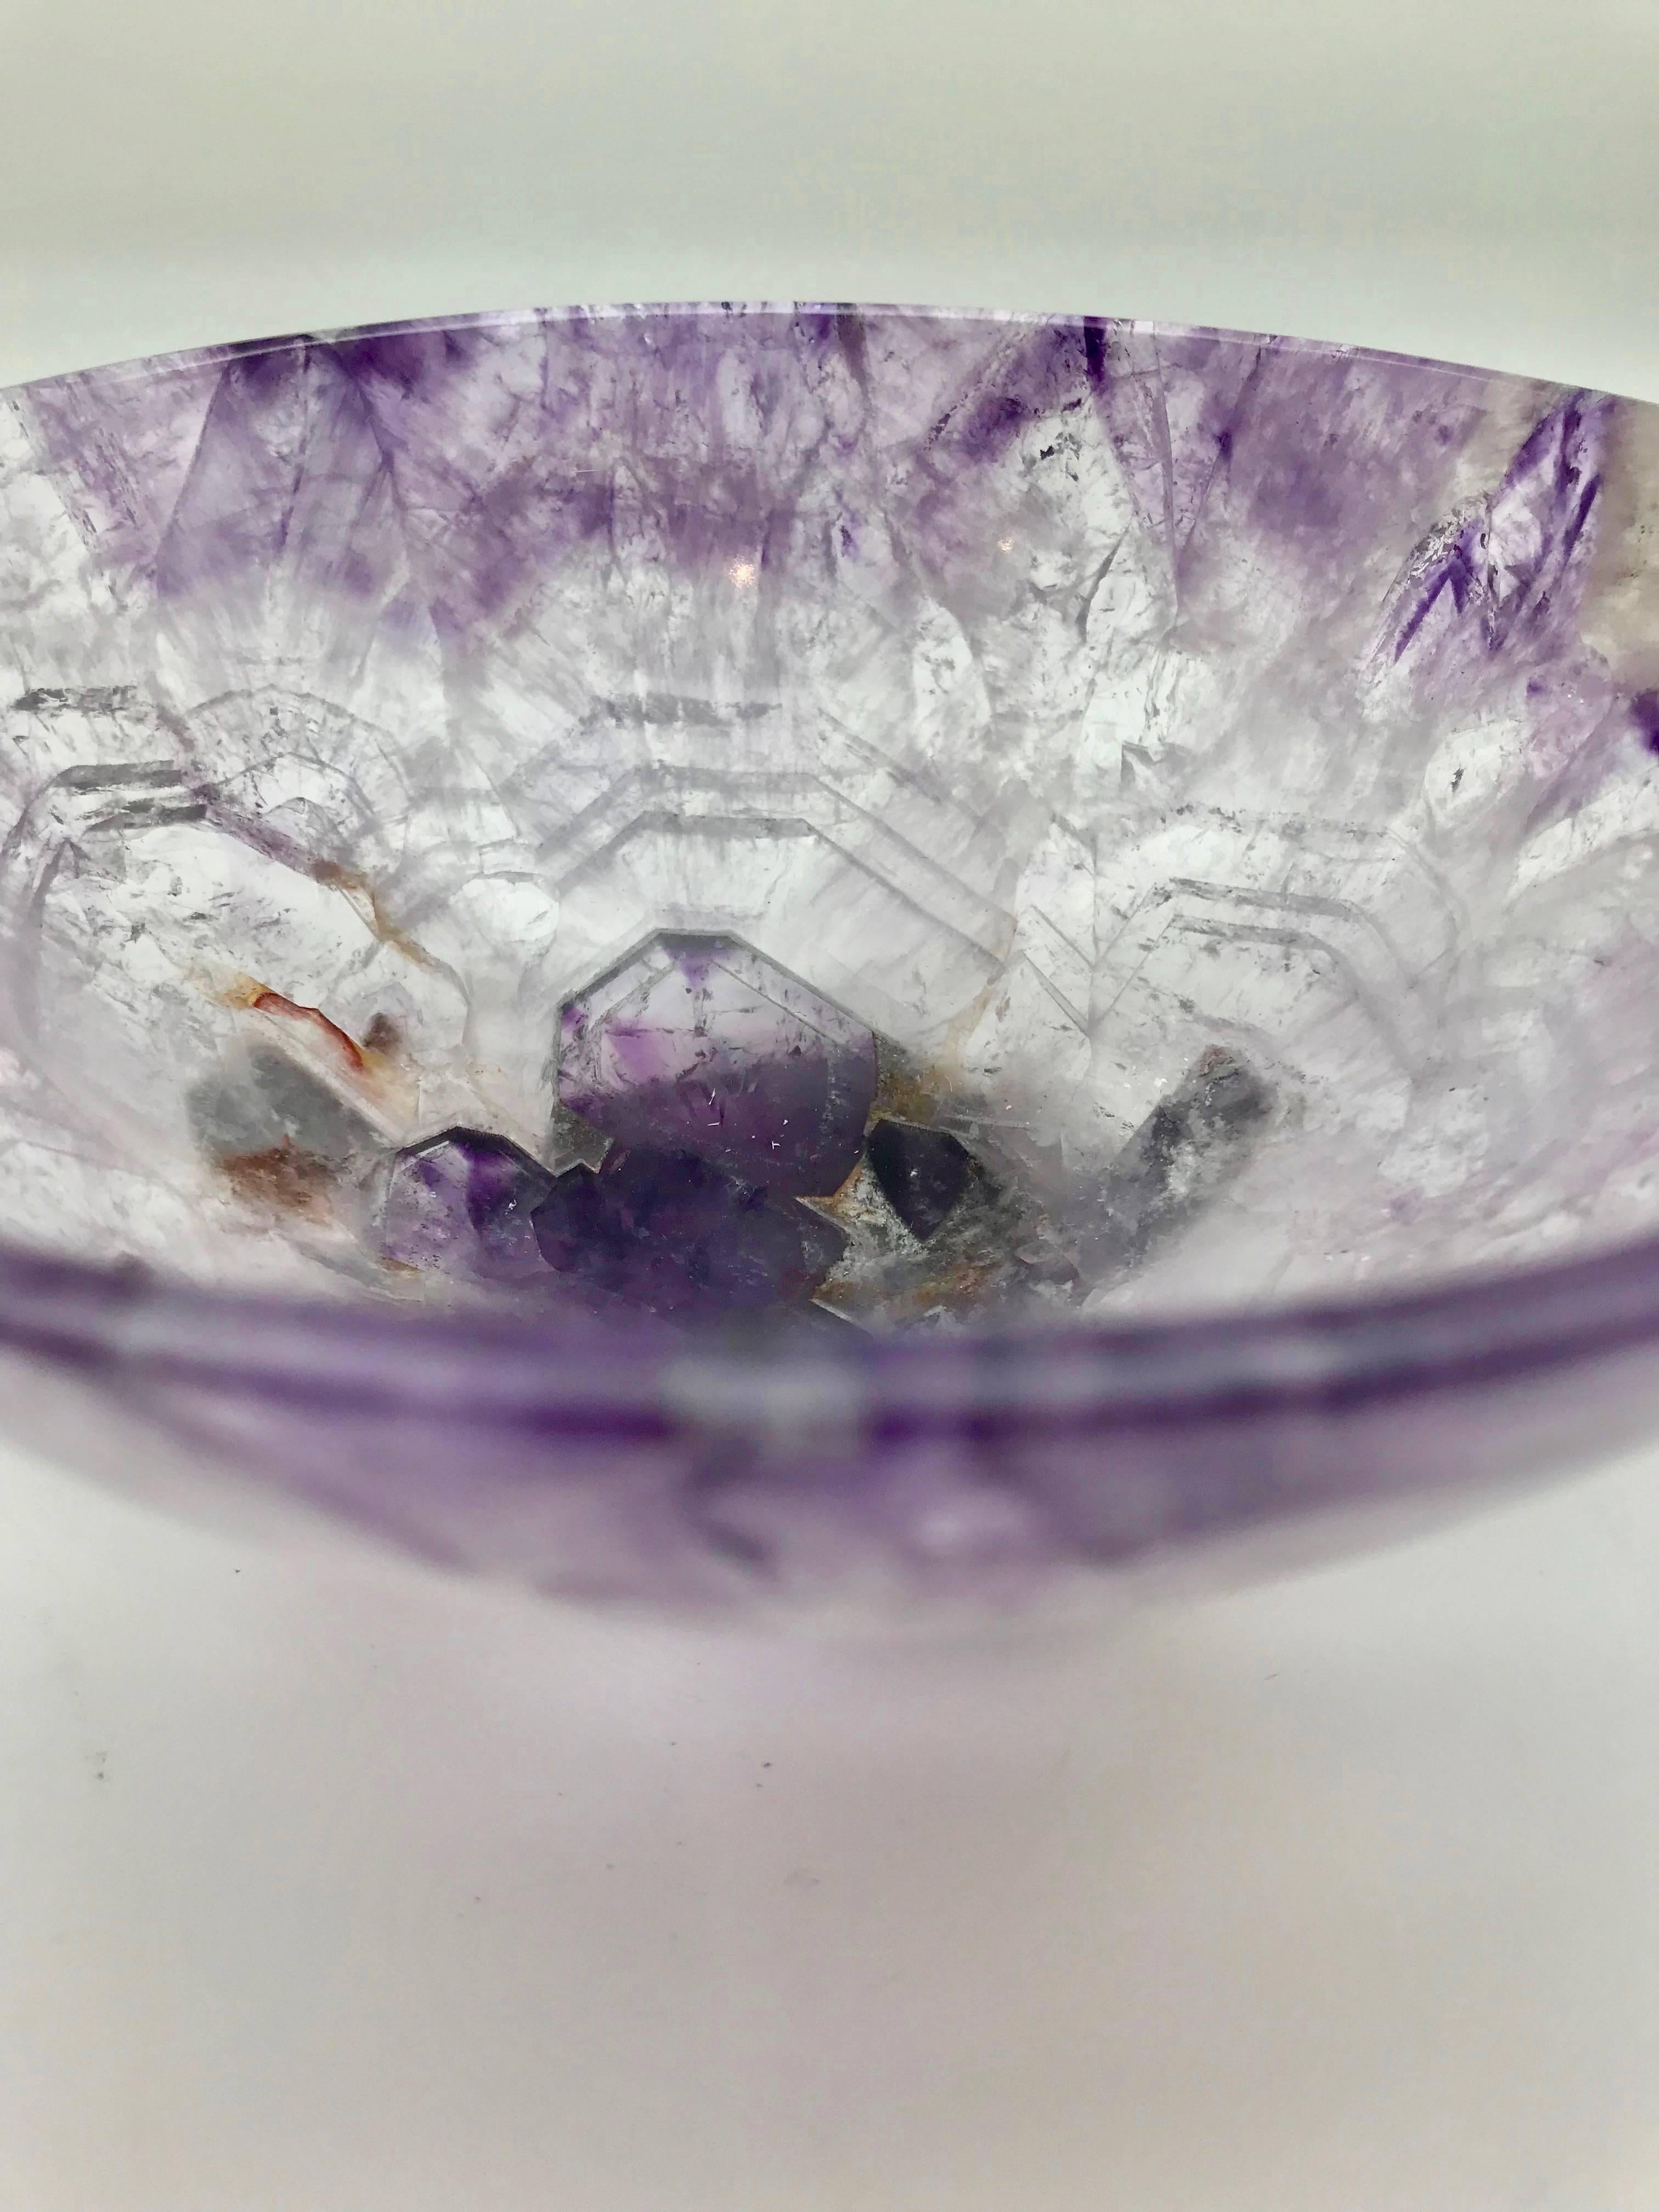 Indian Large Hand-Carved Semi-Precious Gemstone Amethyst Bowl from India